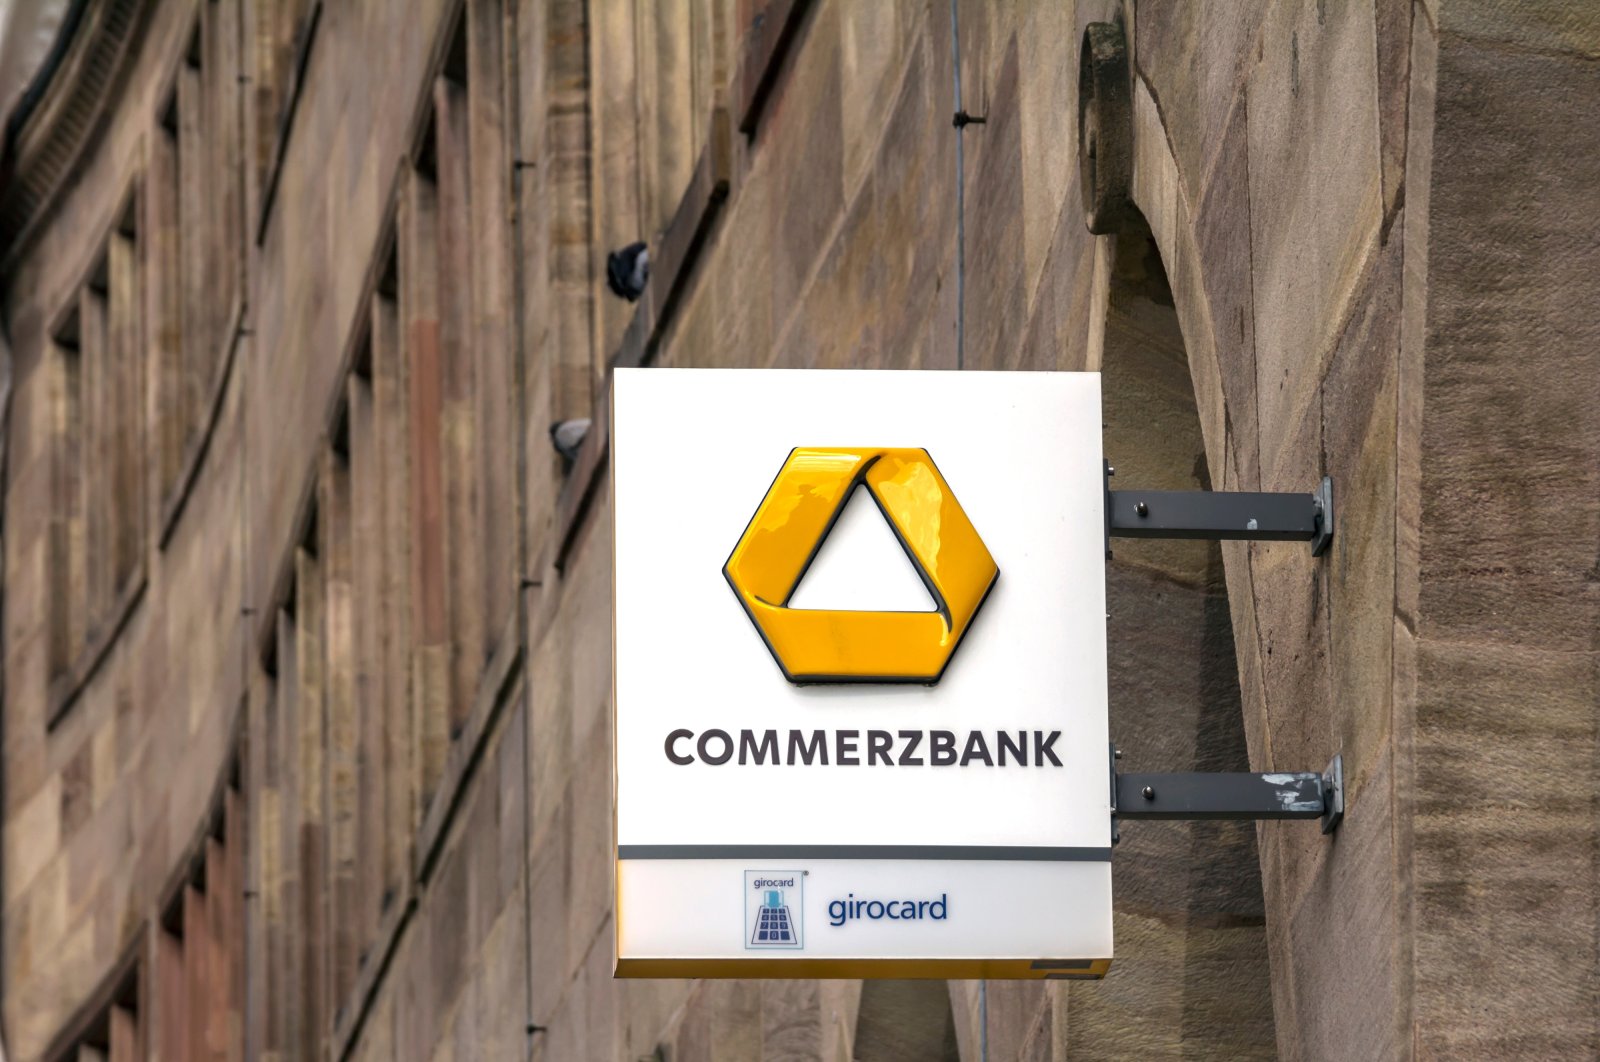 The sign of a Commerzbank branch, Nurnberg, Germany, Aug. 11, 2019. (Shutterstock Photo)